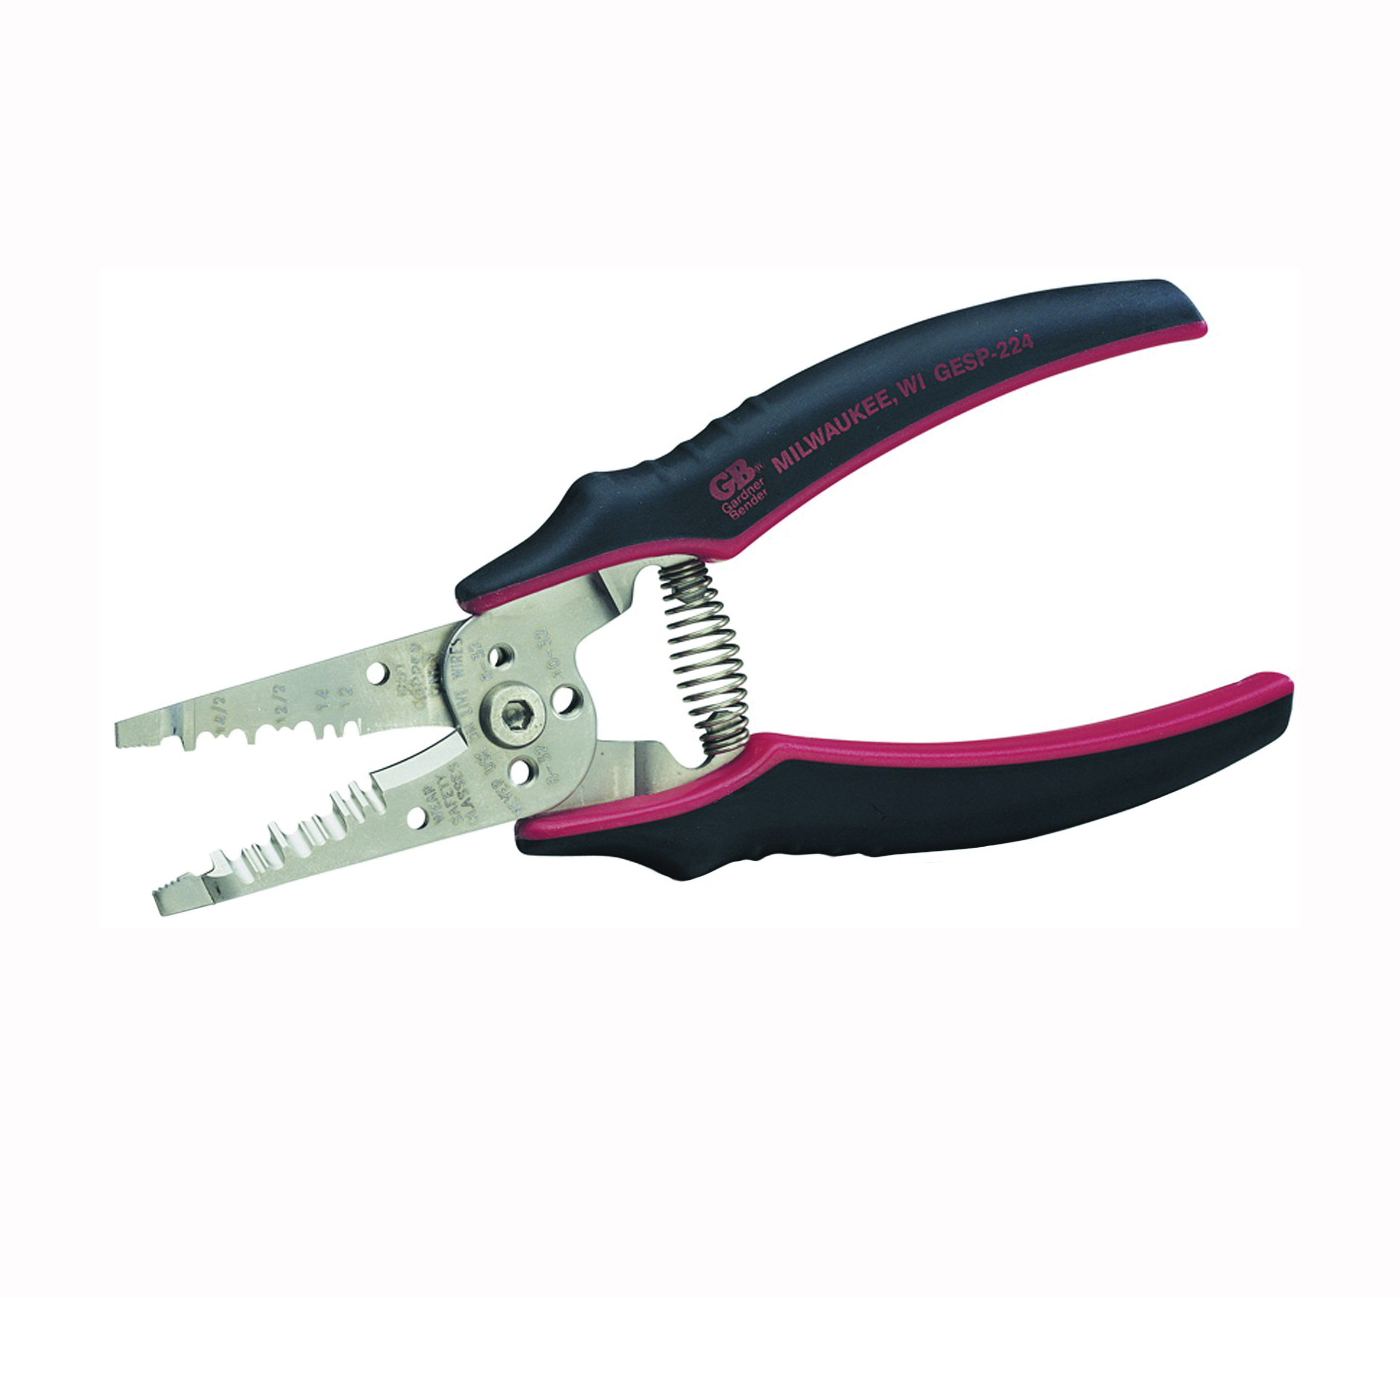 GESP-224 Wire Stripper, 12 to 14 AWG Wire, 12/2 to 14/2 AWG Stripping, 7-1/4 in OAL, Cushion-Grip Handle